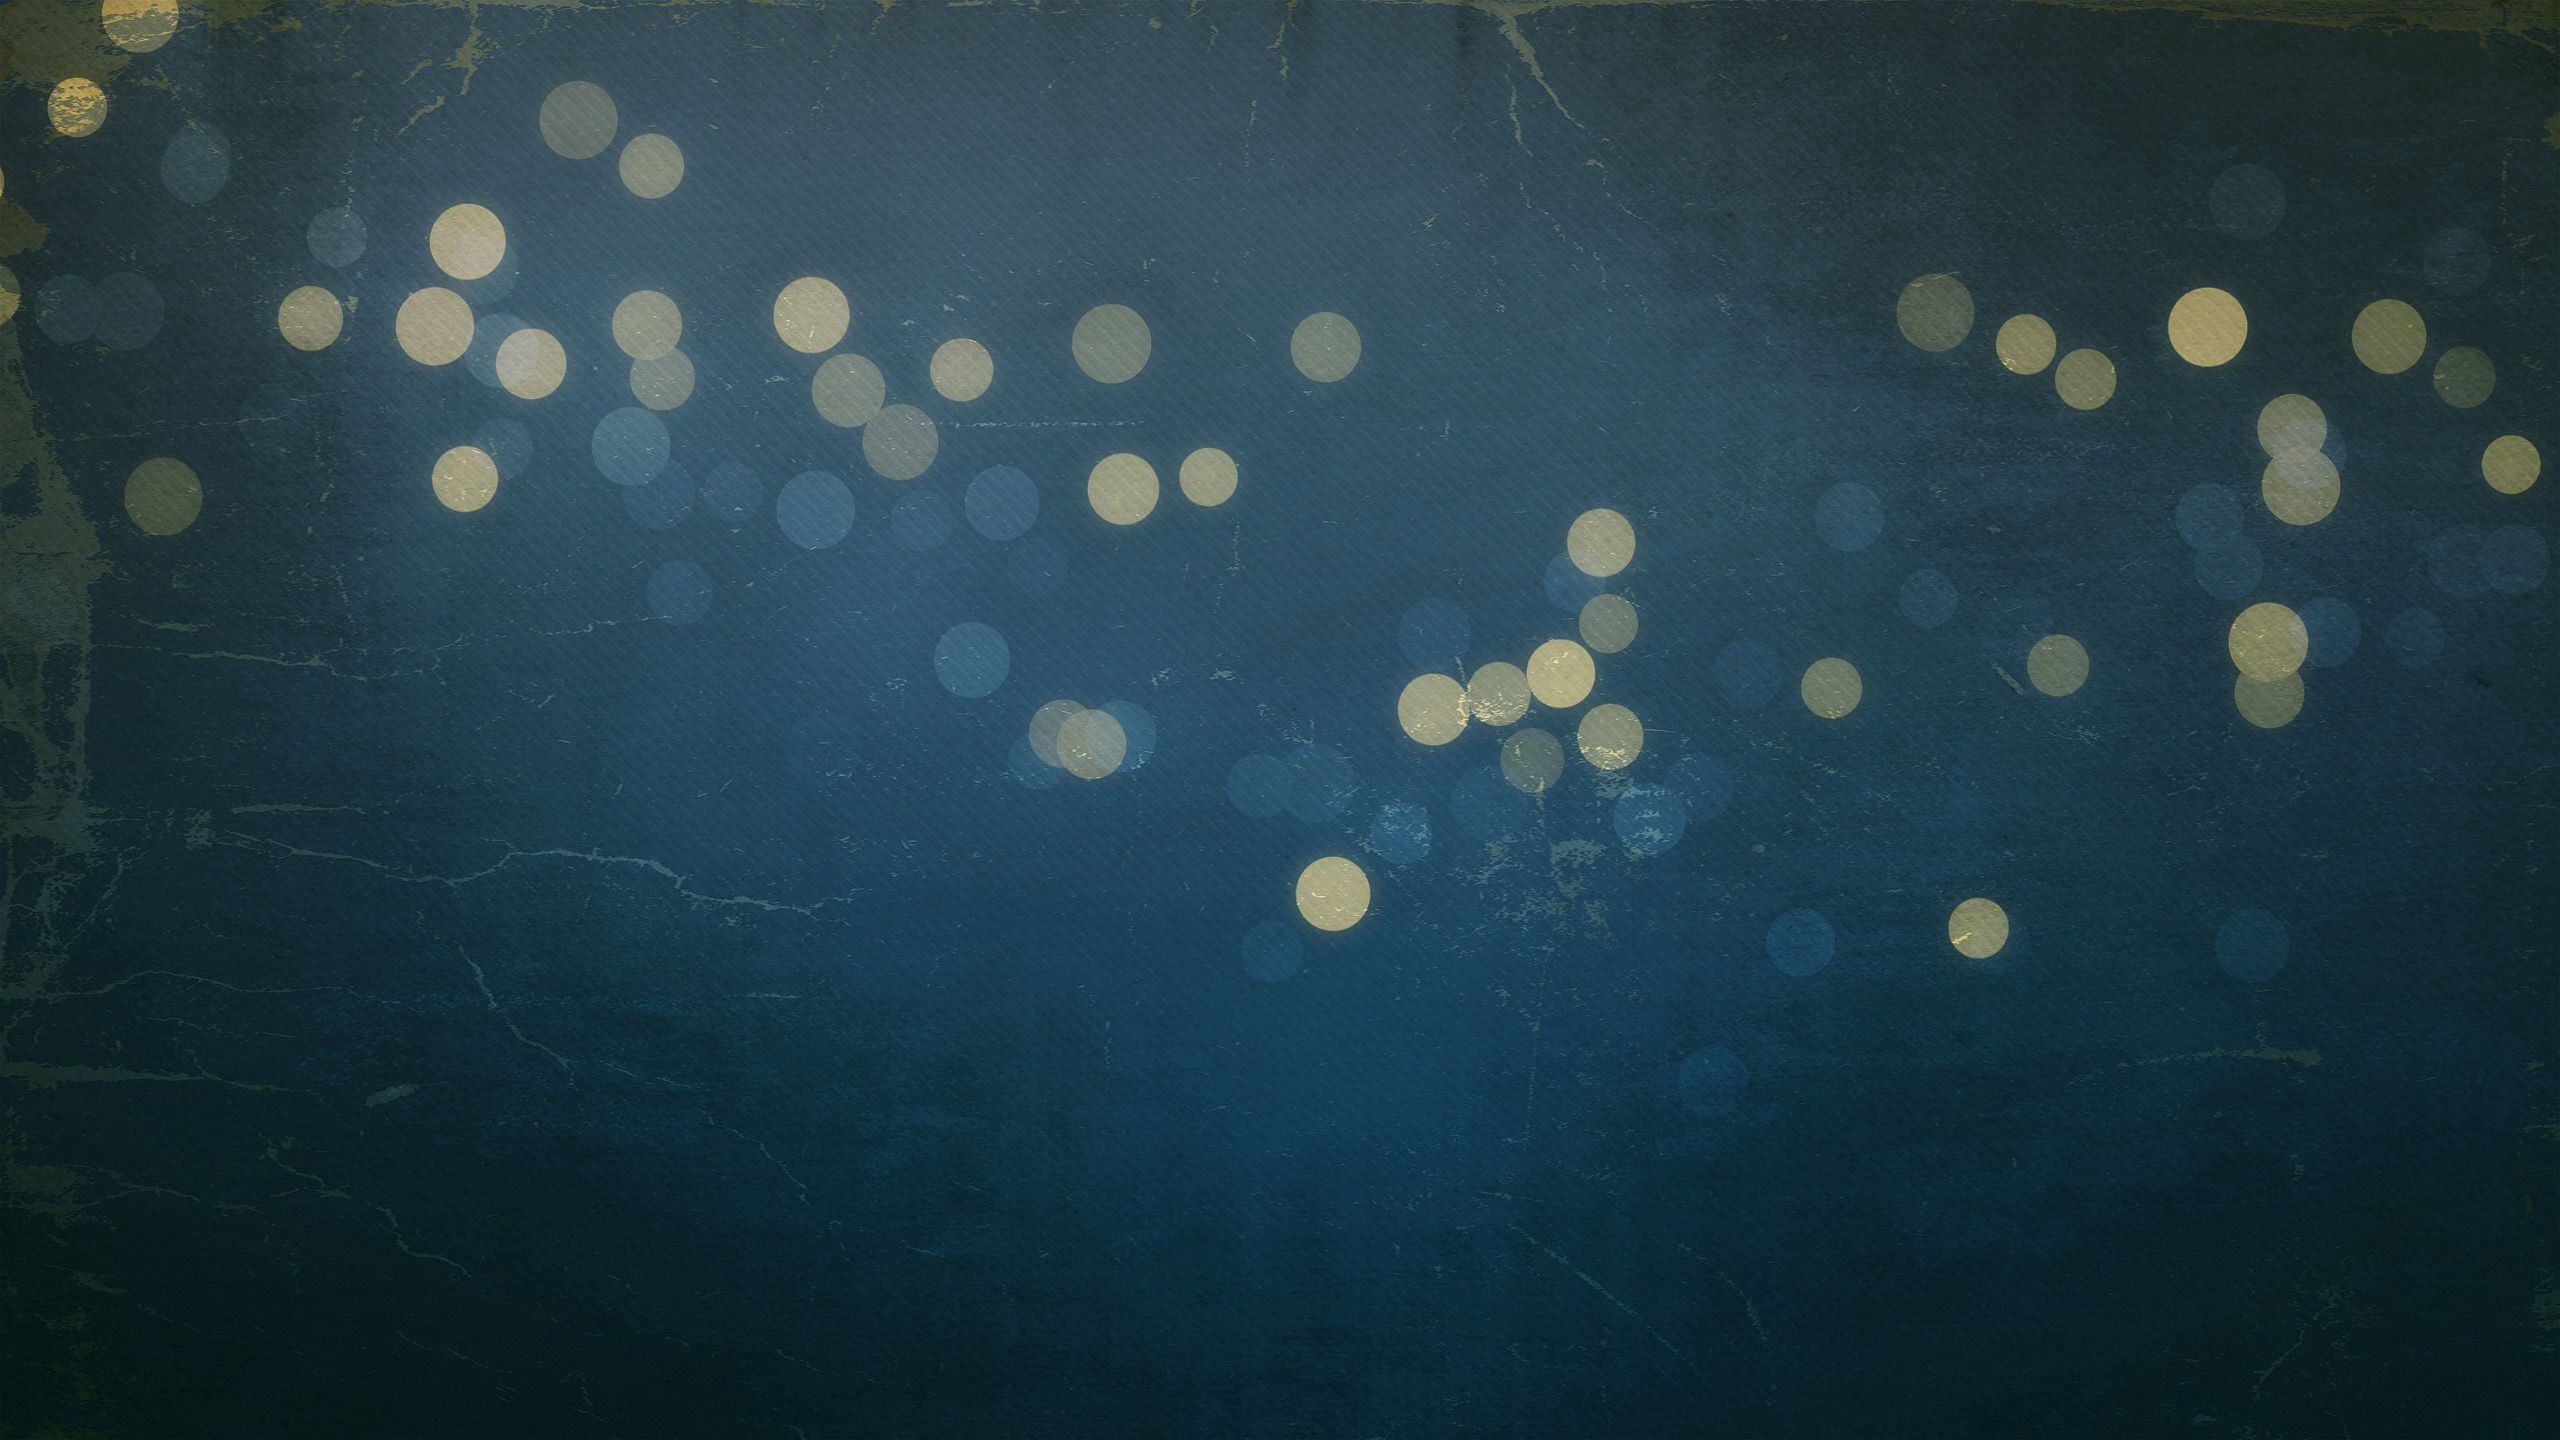 PC Wallpapers spots, textures, background, glare, circles, texture, stains